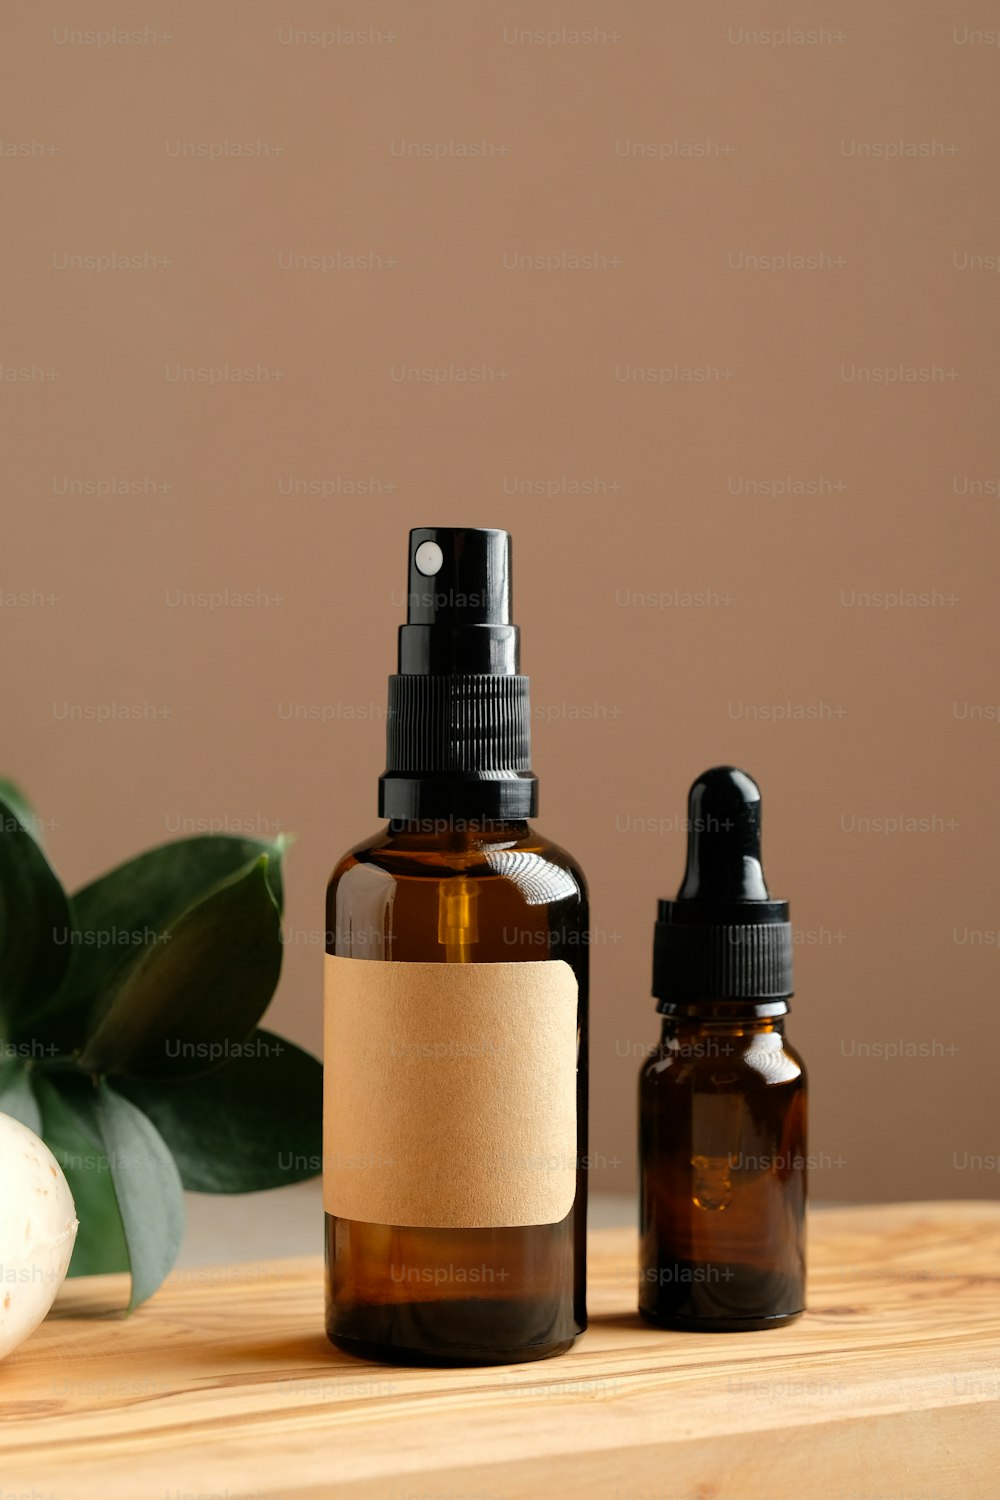 Set of natural organic SPA beauty products on wooden board. Amber glass spray bottle, homemade soap, serum, and green leaf. Bio cosmetics branding, packaging design.